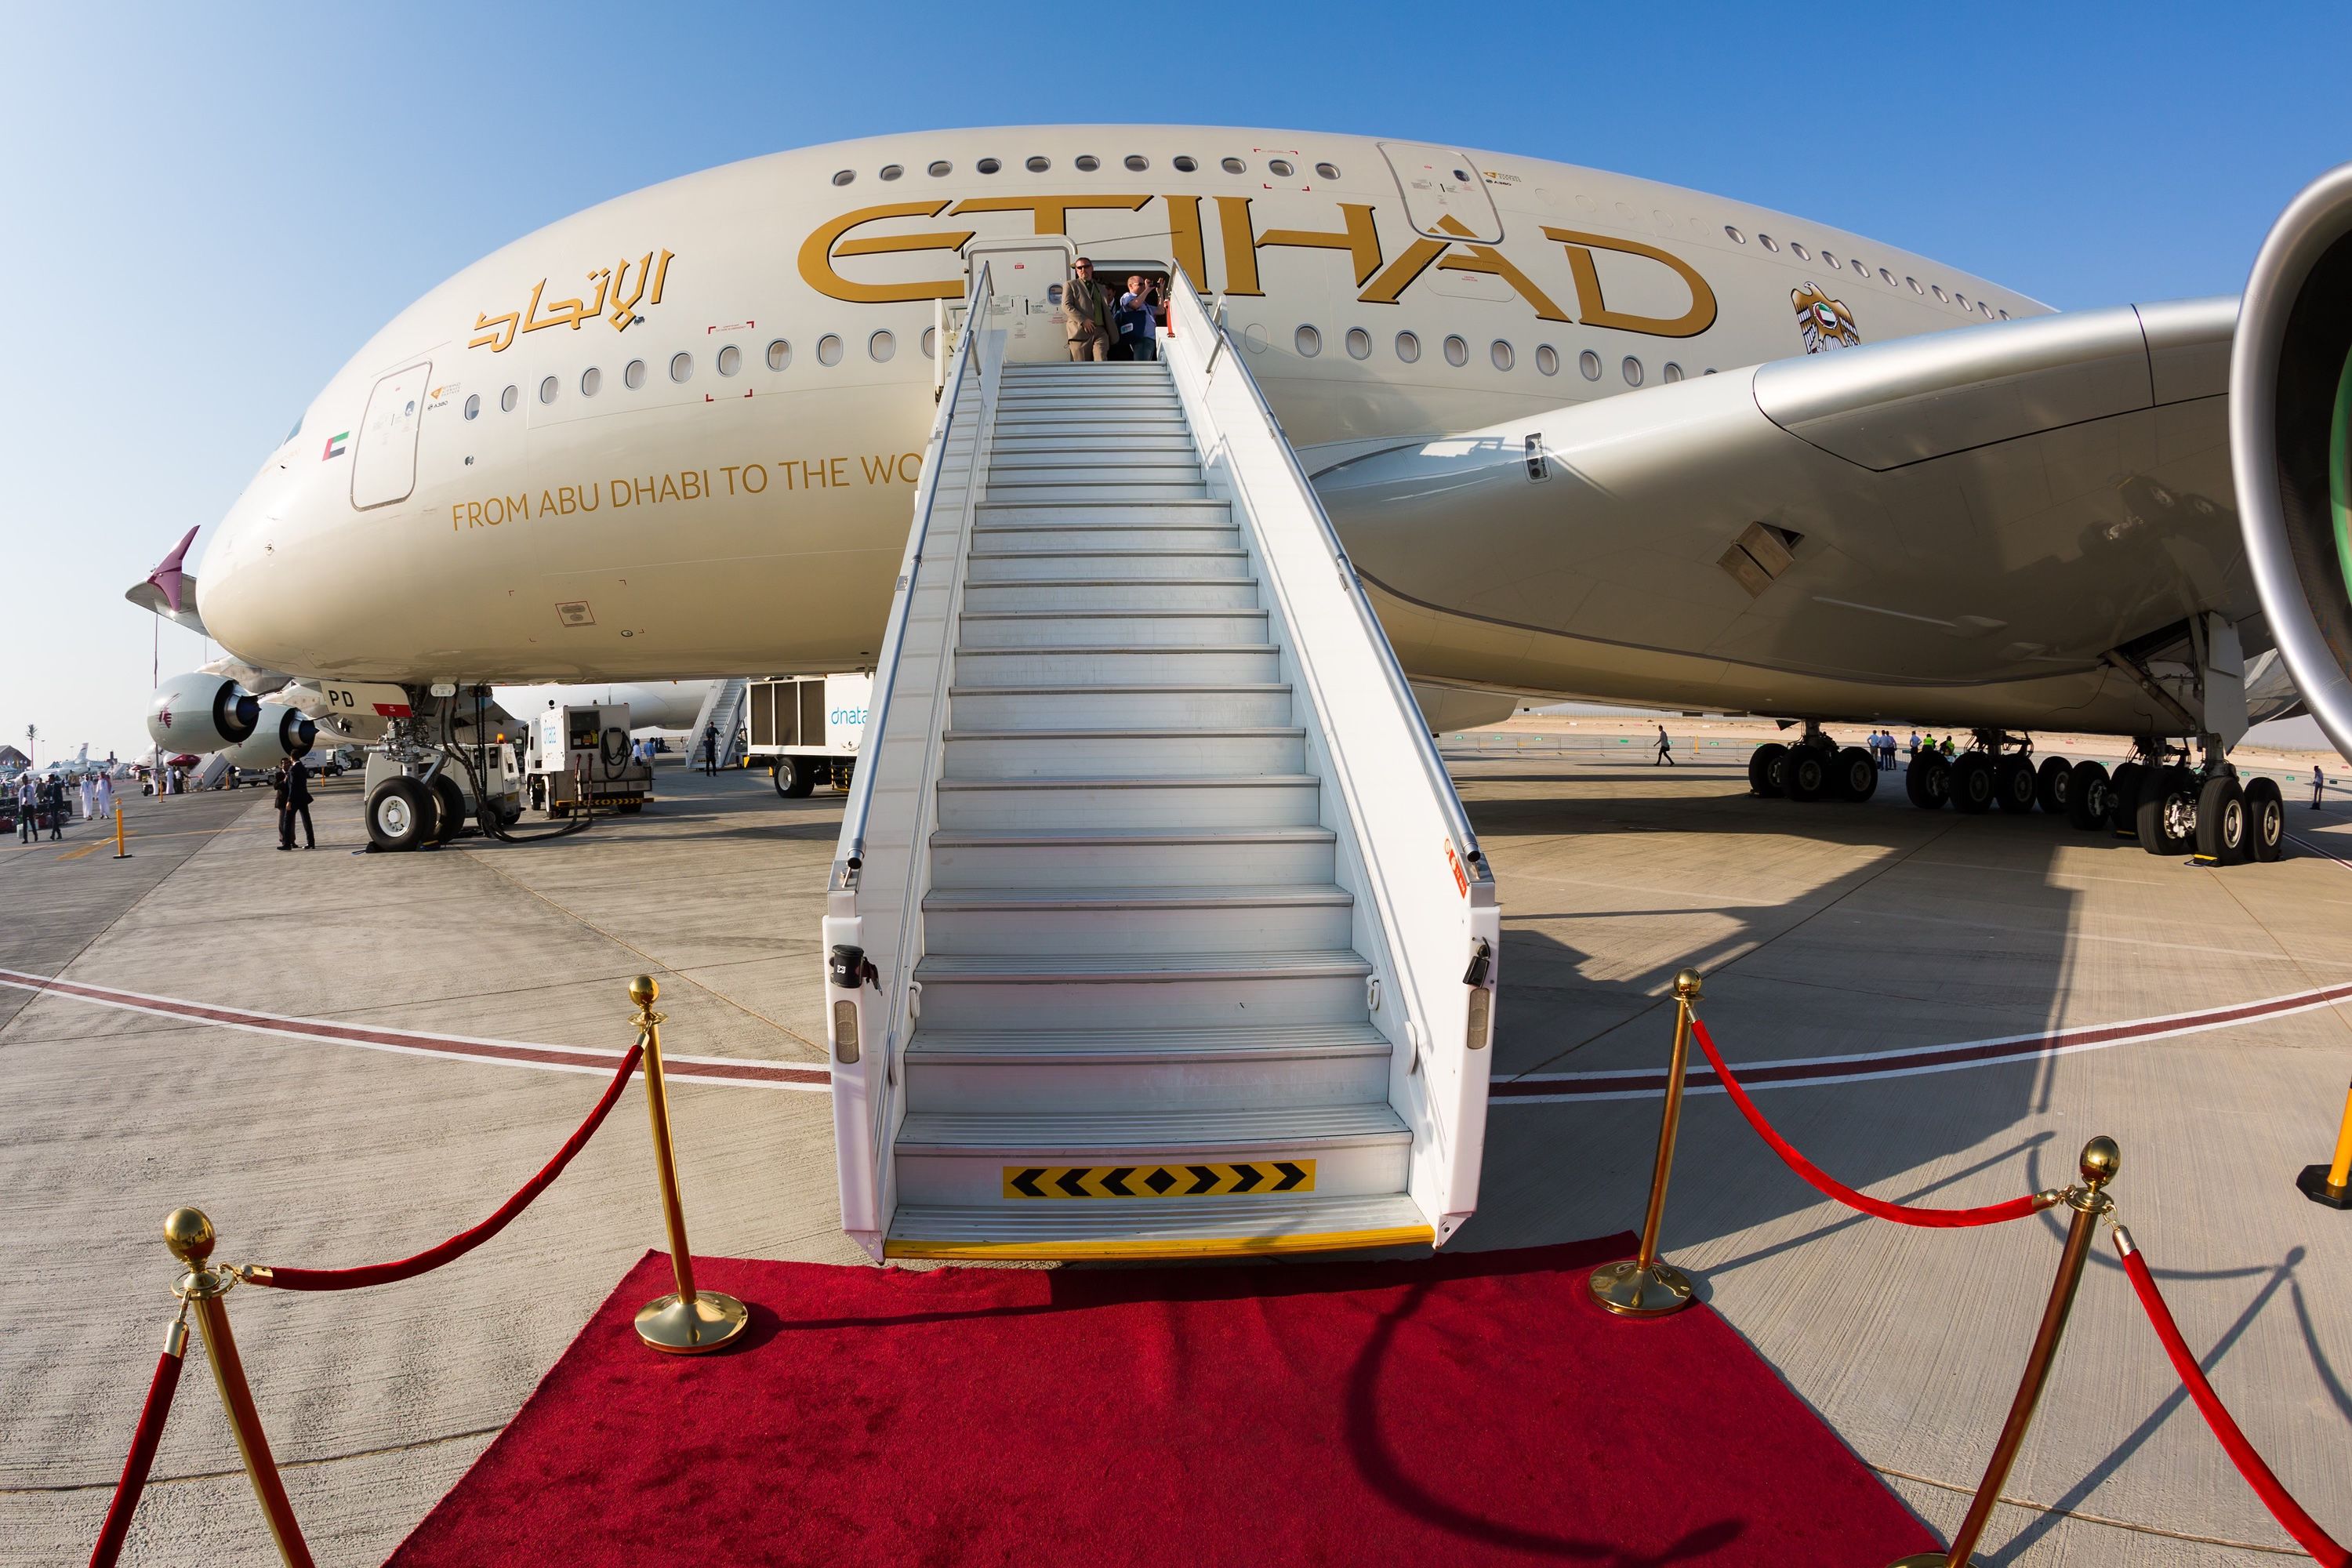 An Etihad Airbus A380 on display with a red carpet laid at the edge of the air stairs.